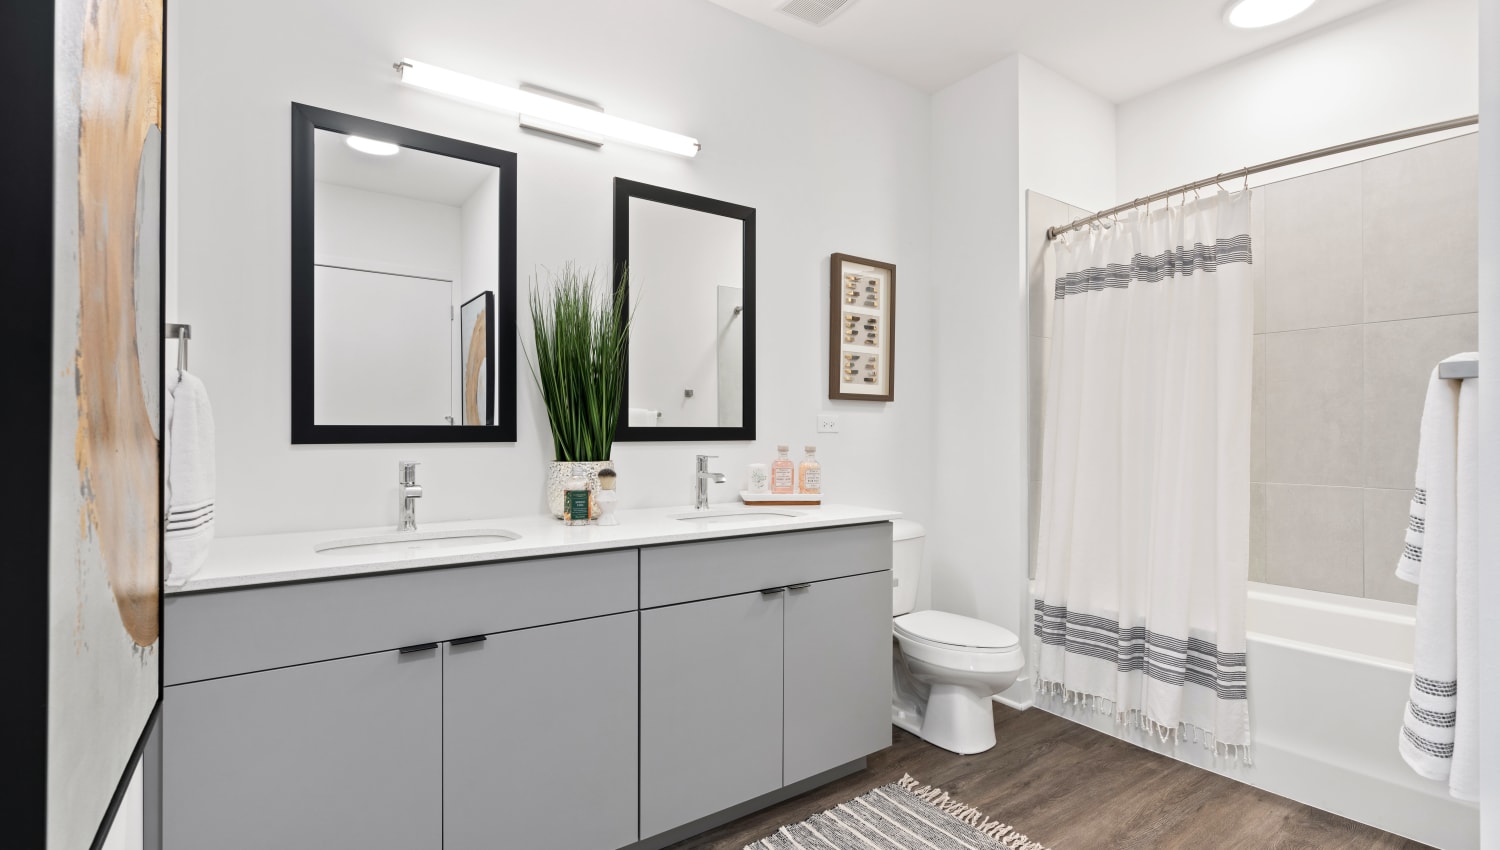 Two mirrors in the bathroom over the spacious vanity at The Residences at Sawmill Station in Morton Grove, Illinois